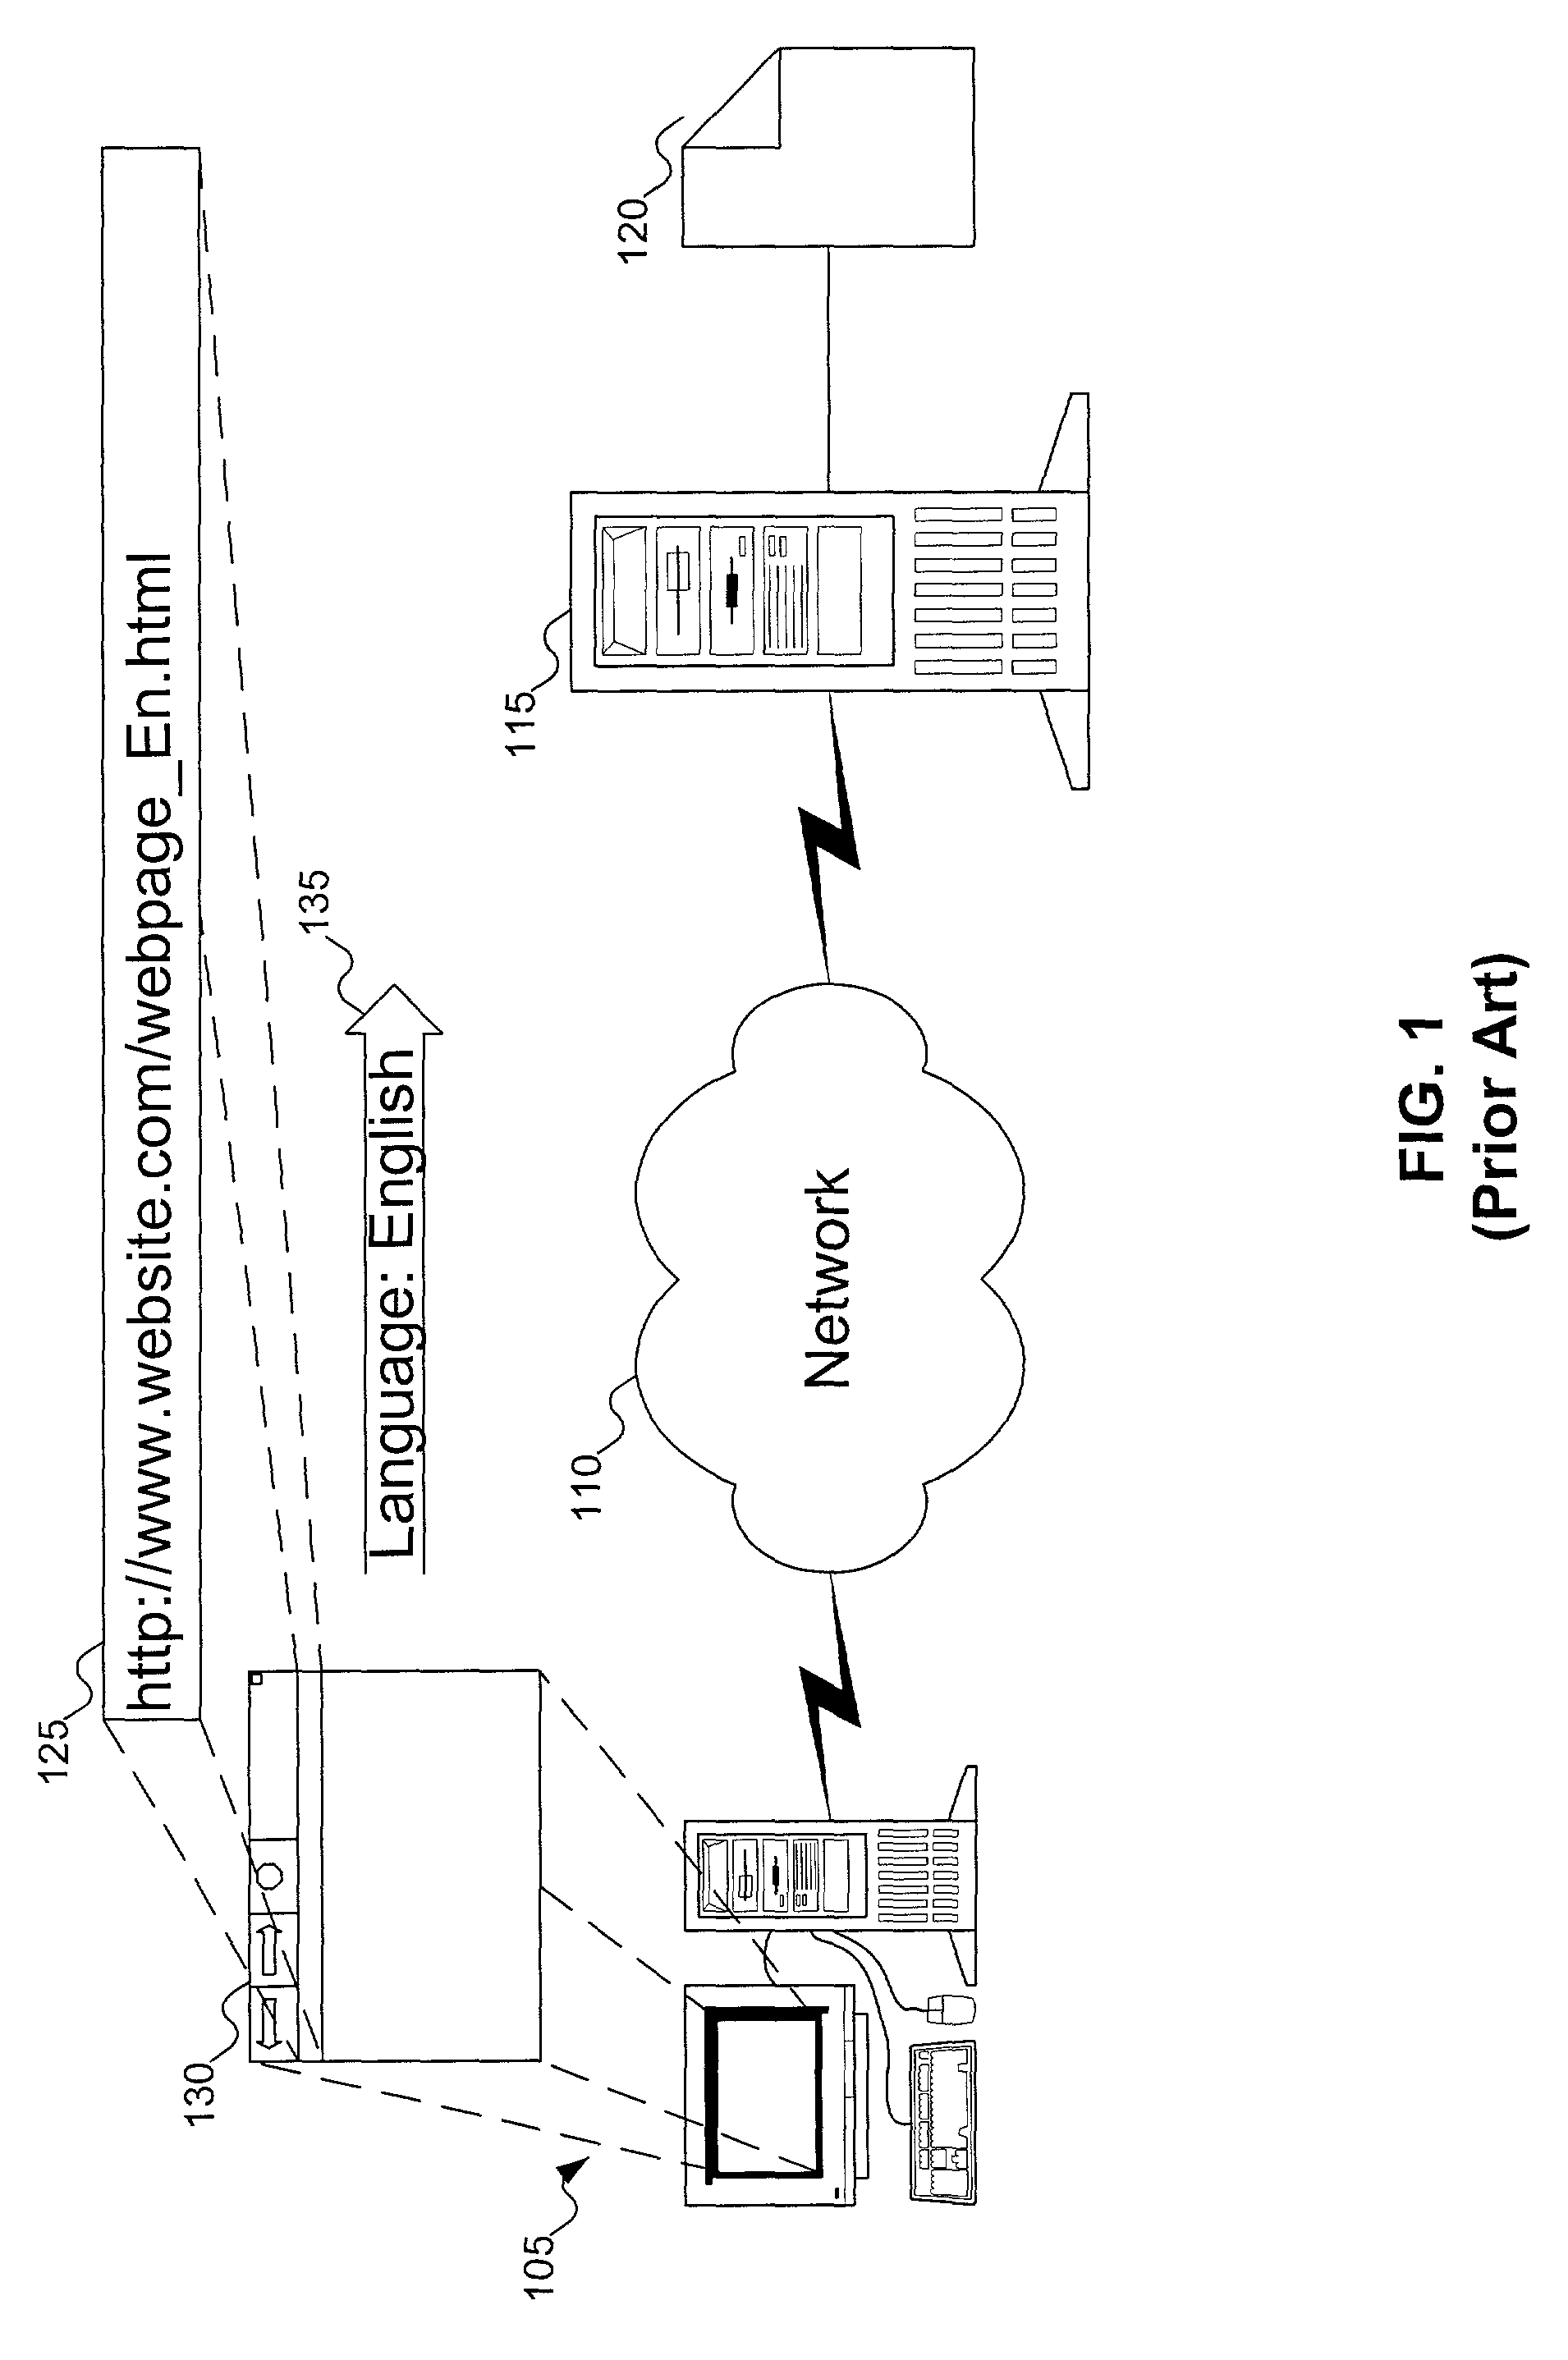 Method to dynamically determine a user's language for a network